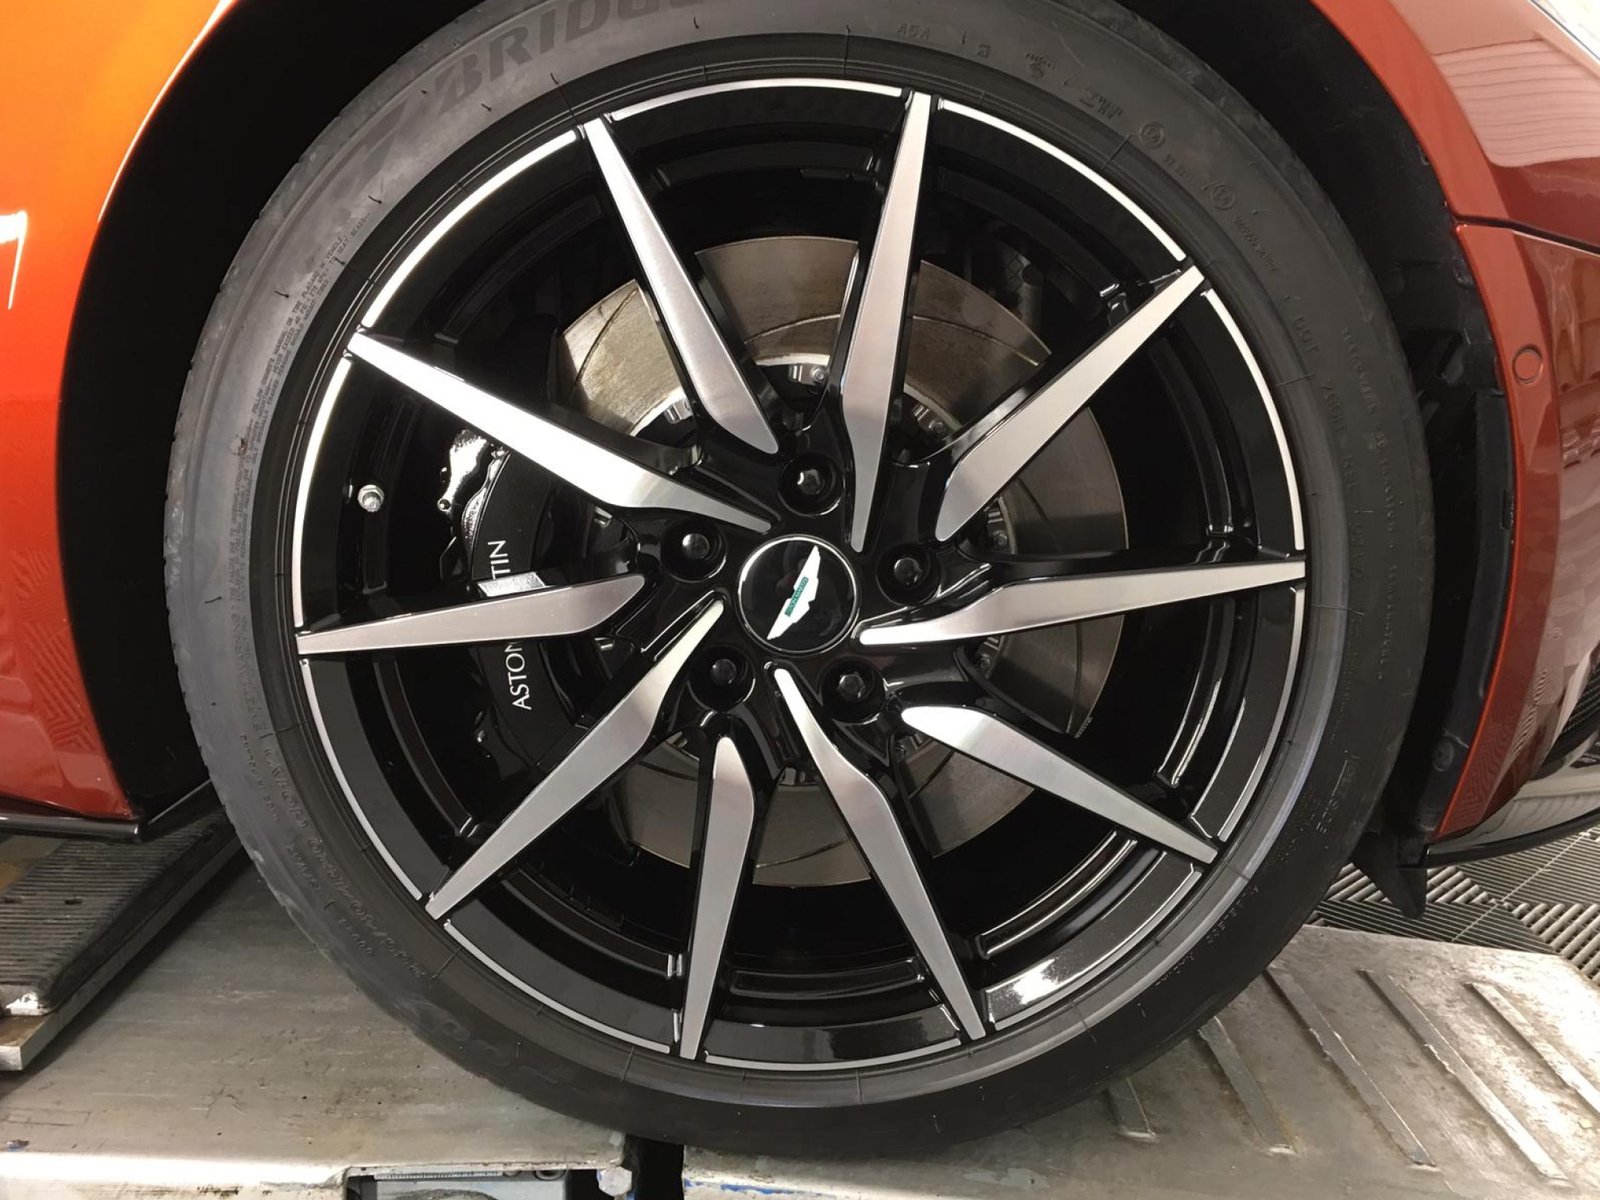 Protect Your Wheels with Our Ceramic Pro Coating Service